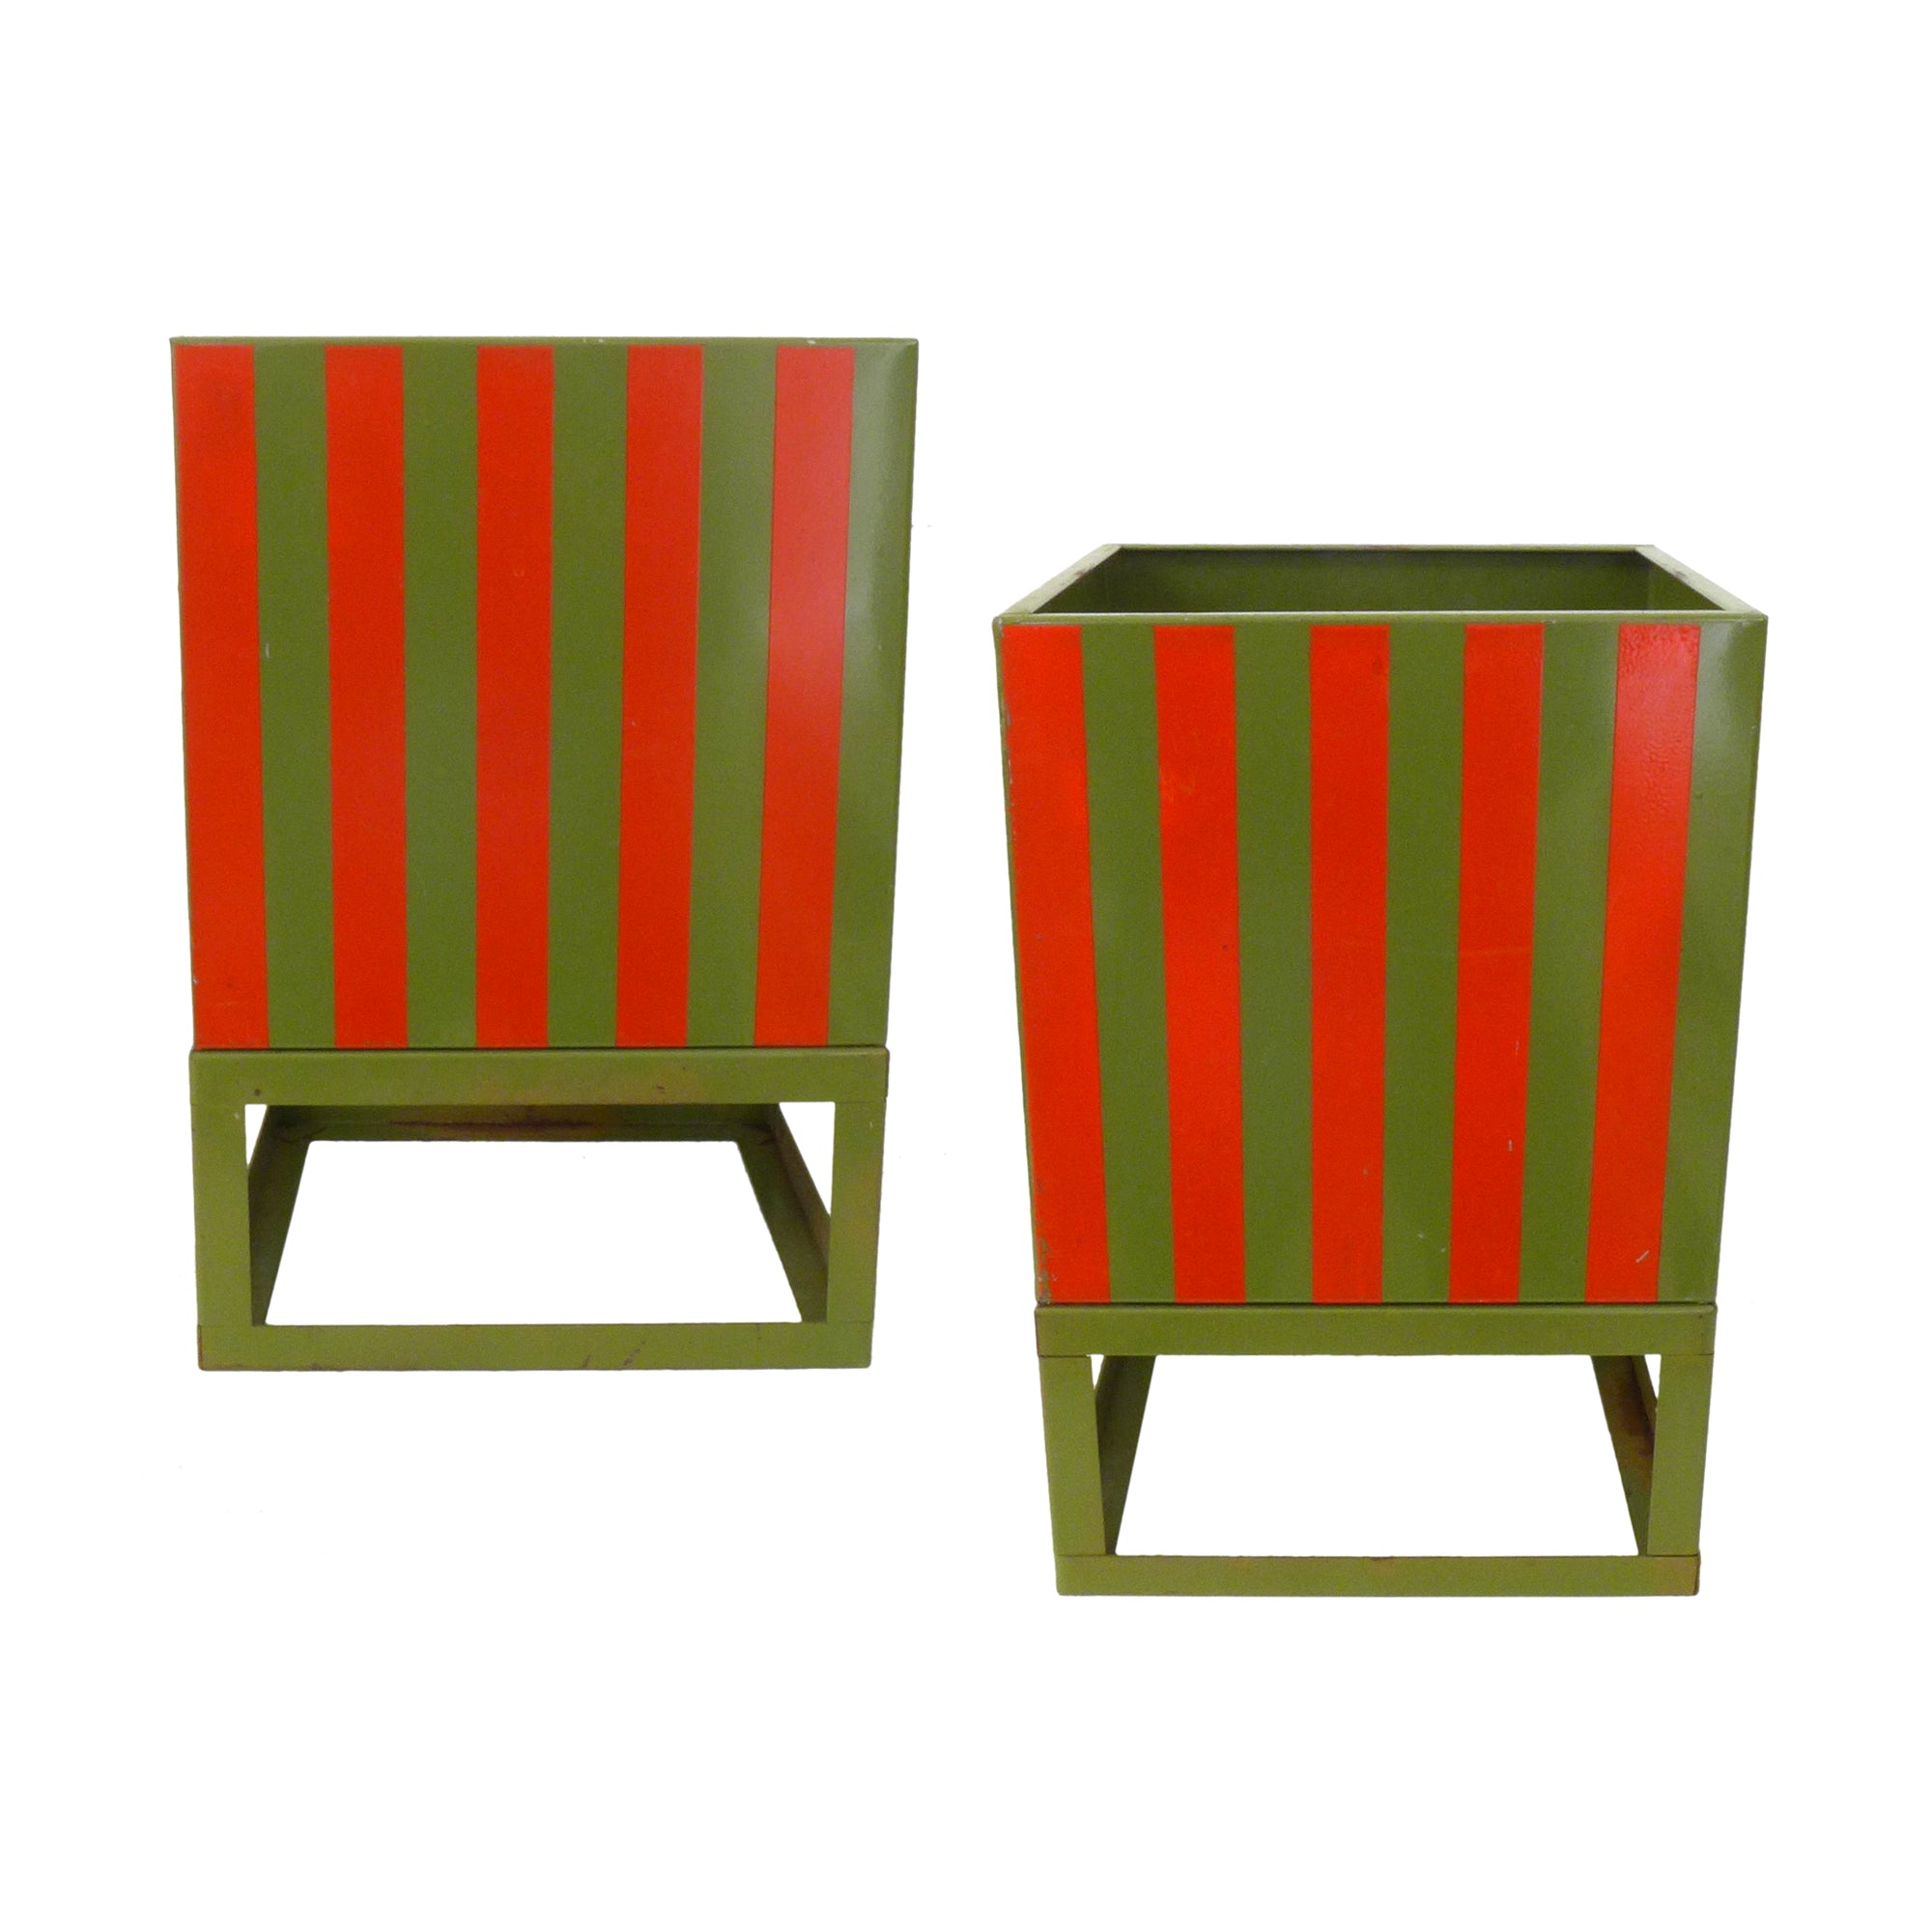 Pair of Striped Metal Planters on Stands